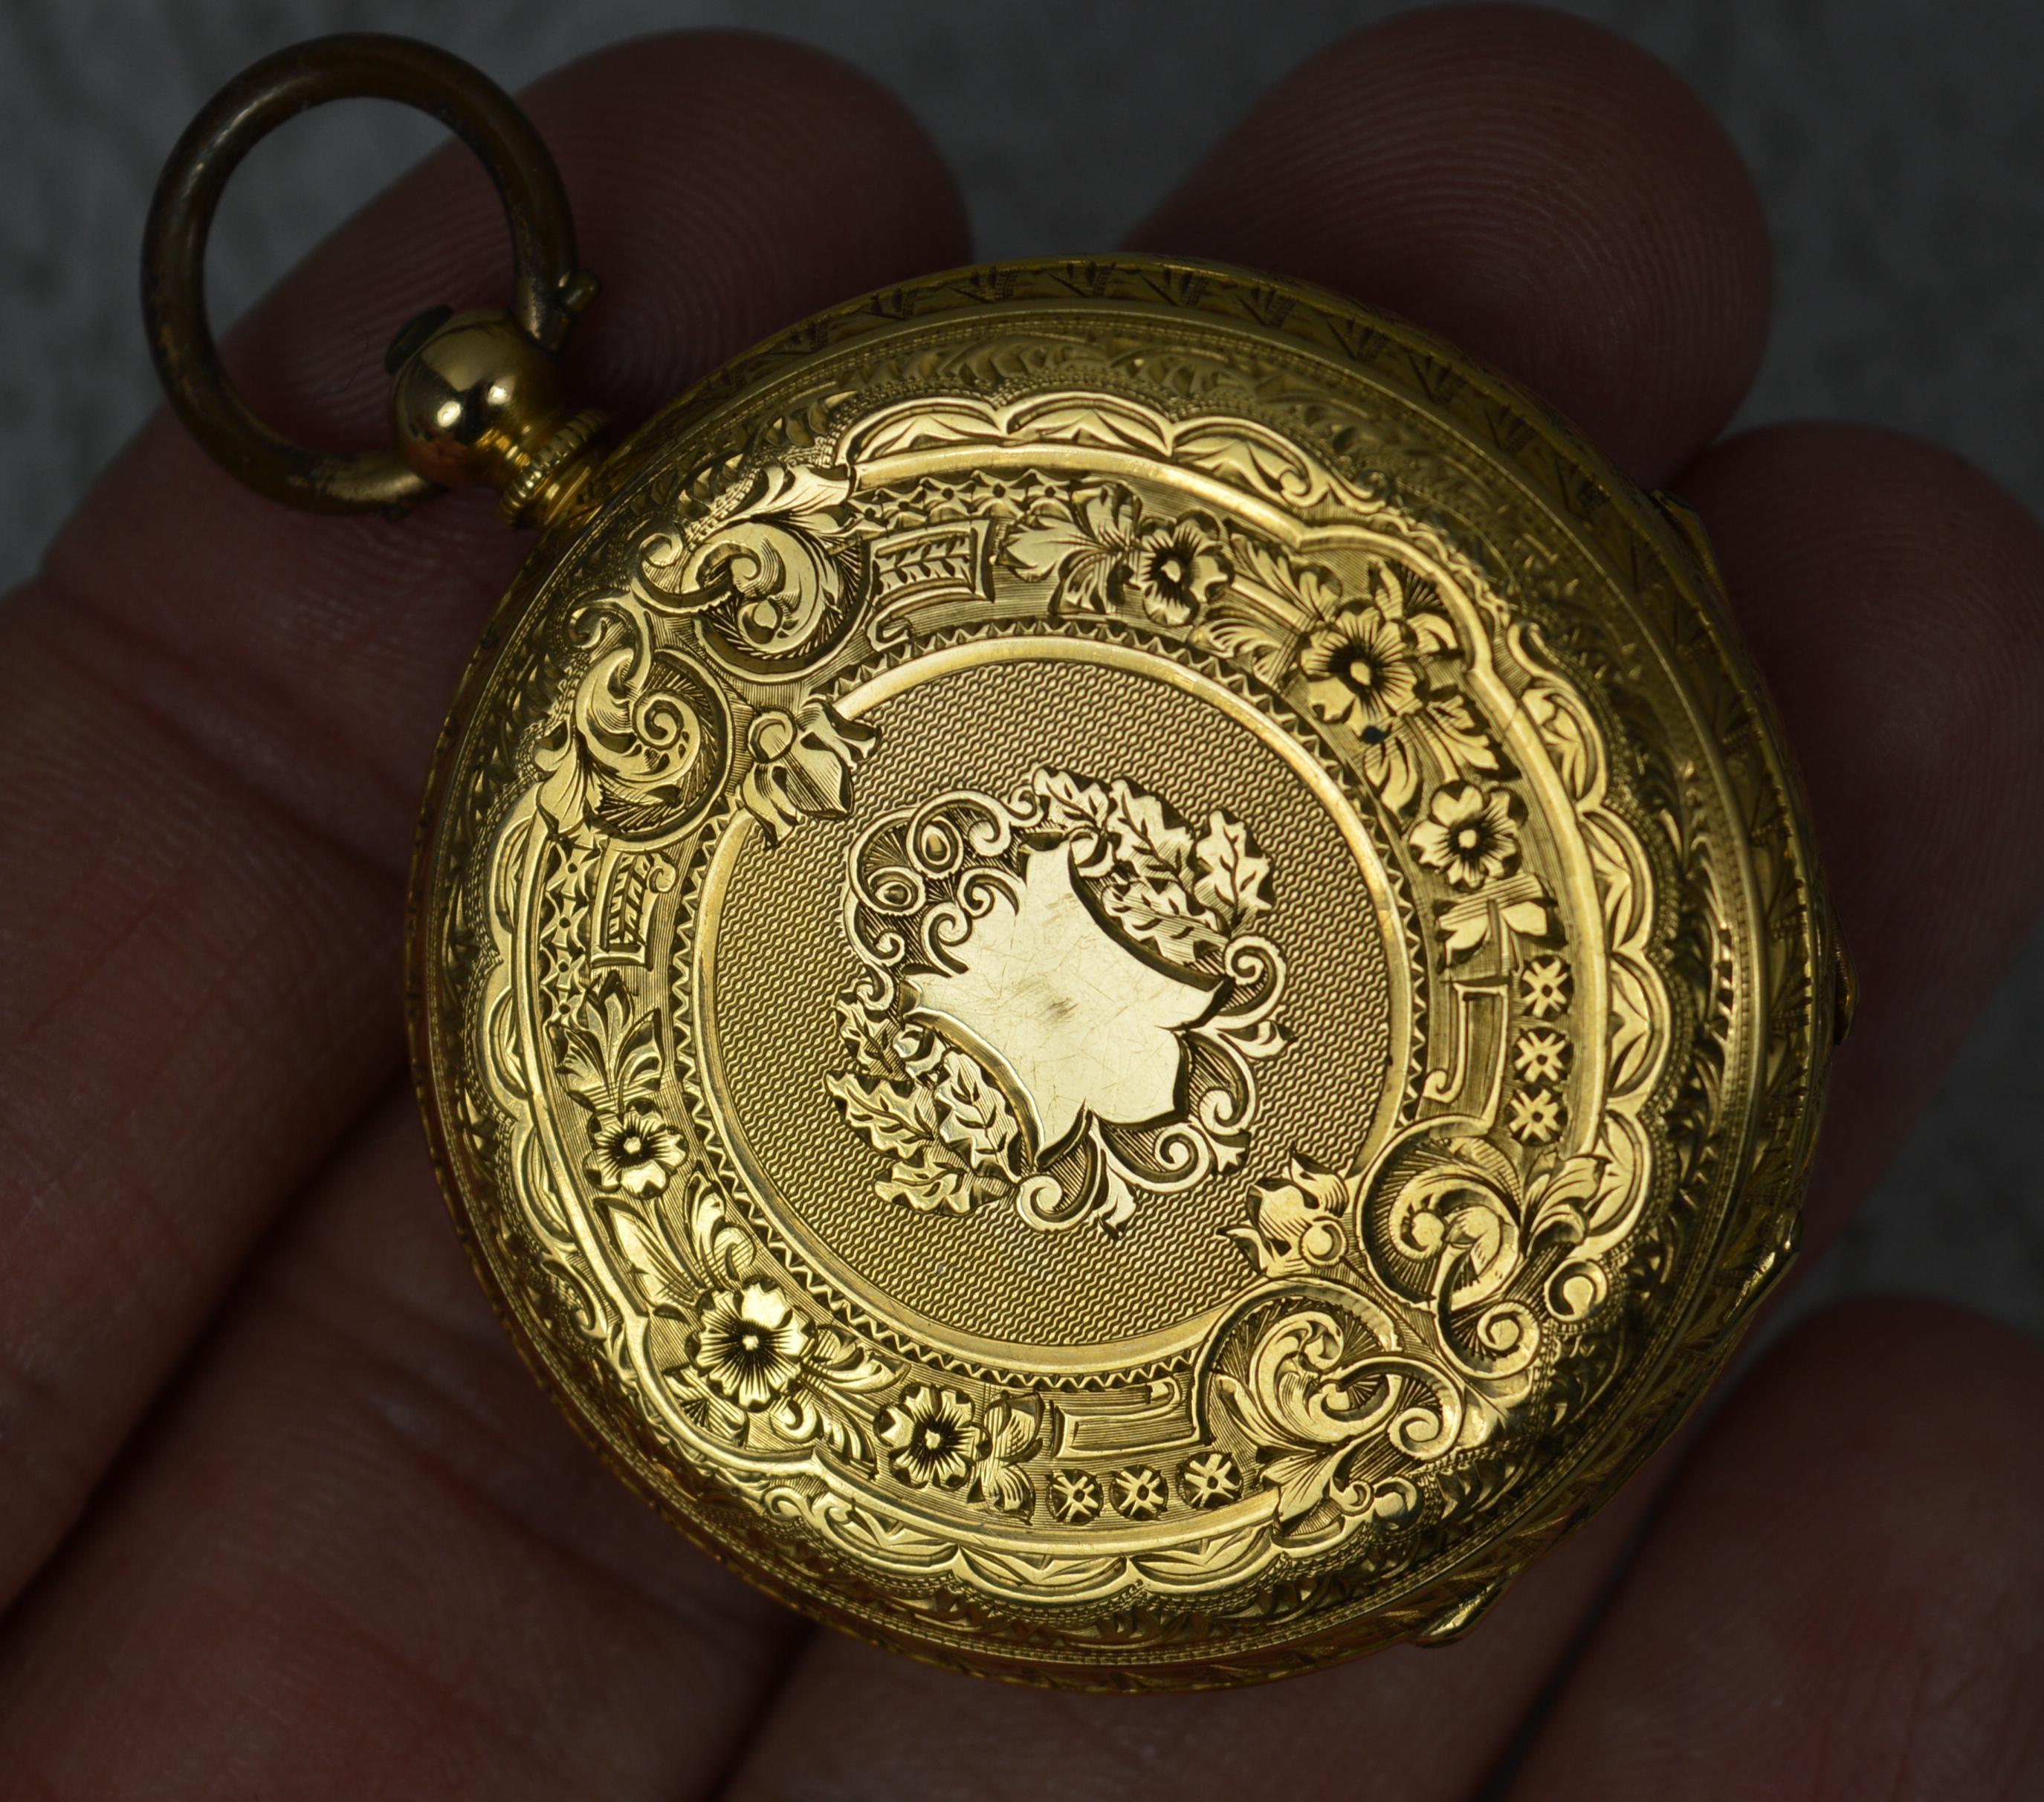 
A fine antique fob pocket watch.

Solid 18 carat gold example with floral engraving throughout the piece.

Complete with fine gilt dial.


Condition ; Very good. Clean and crisp design to the case. Working hinge. Winds and sets hands okay. Clean